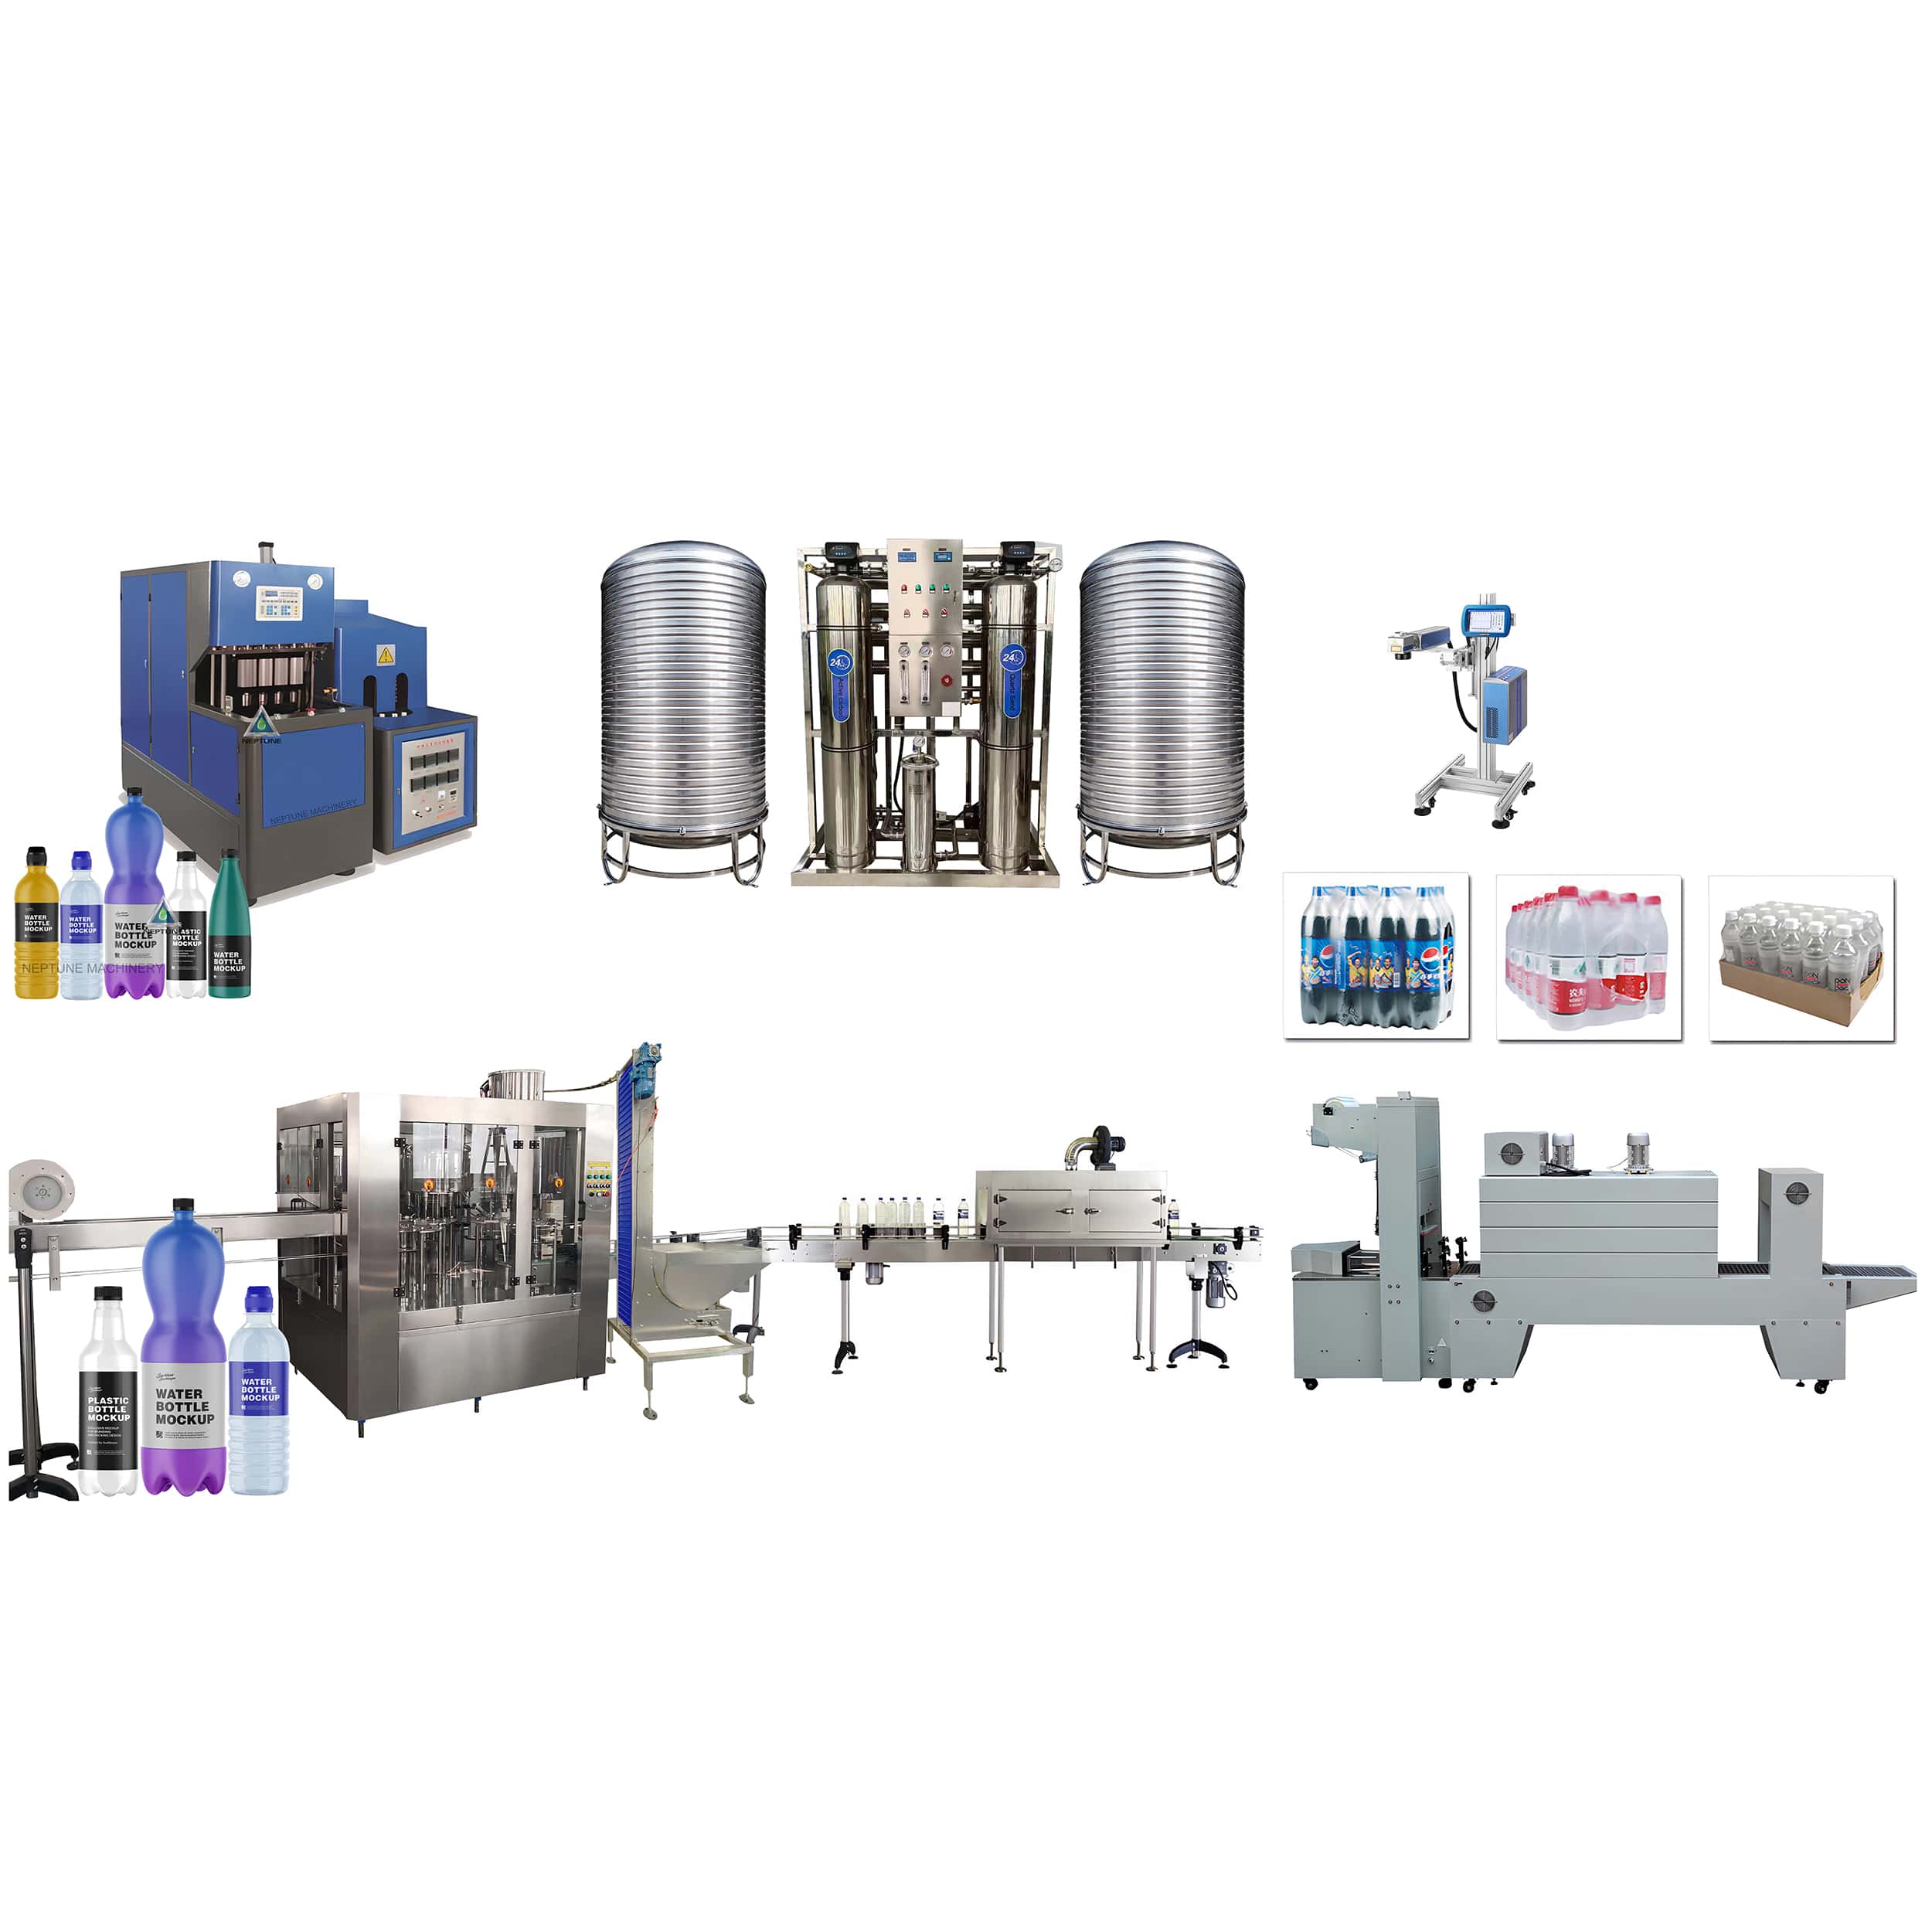 2000BPH SEMIAUTOMATIC WATER BOTTLING PRODUCTION LINE